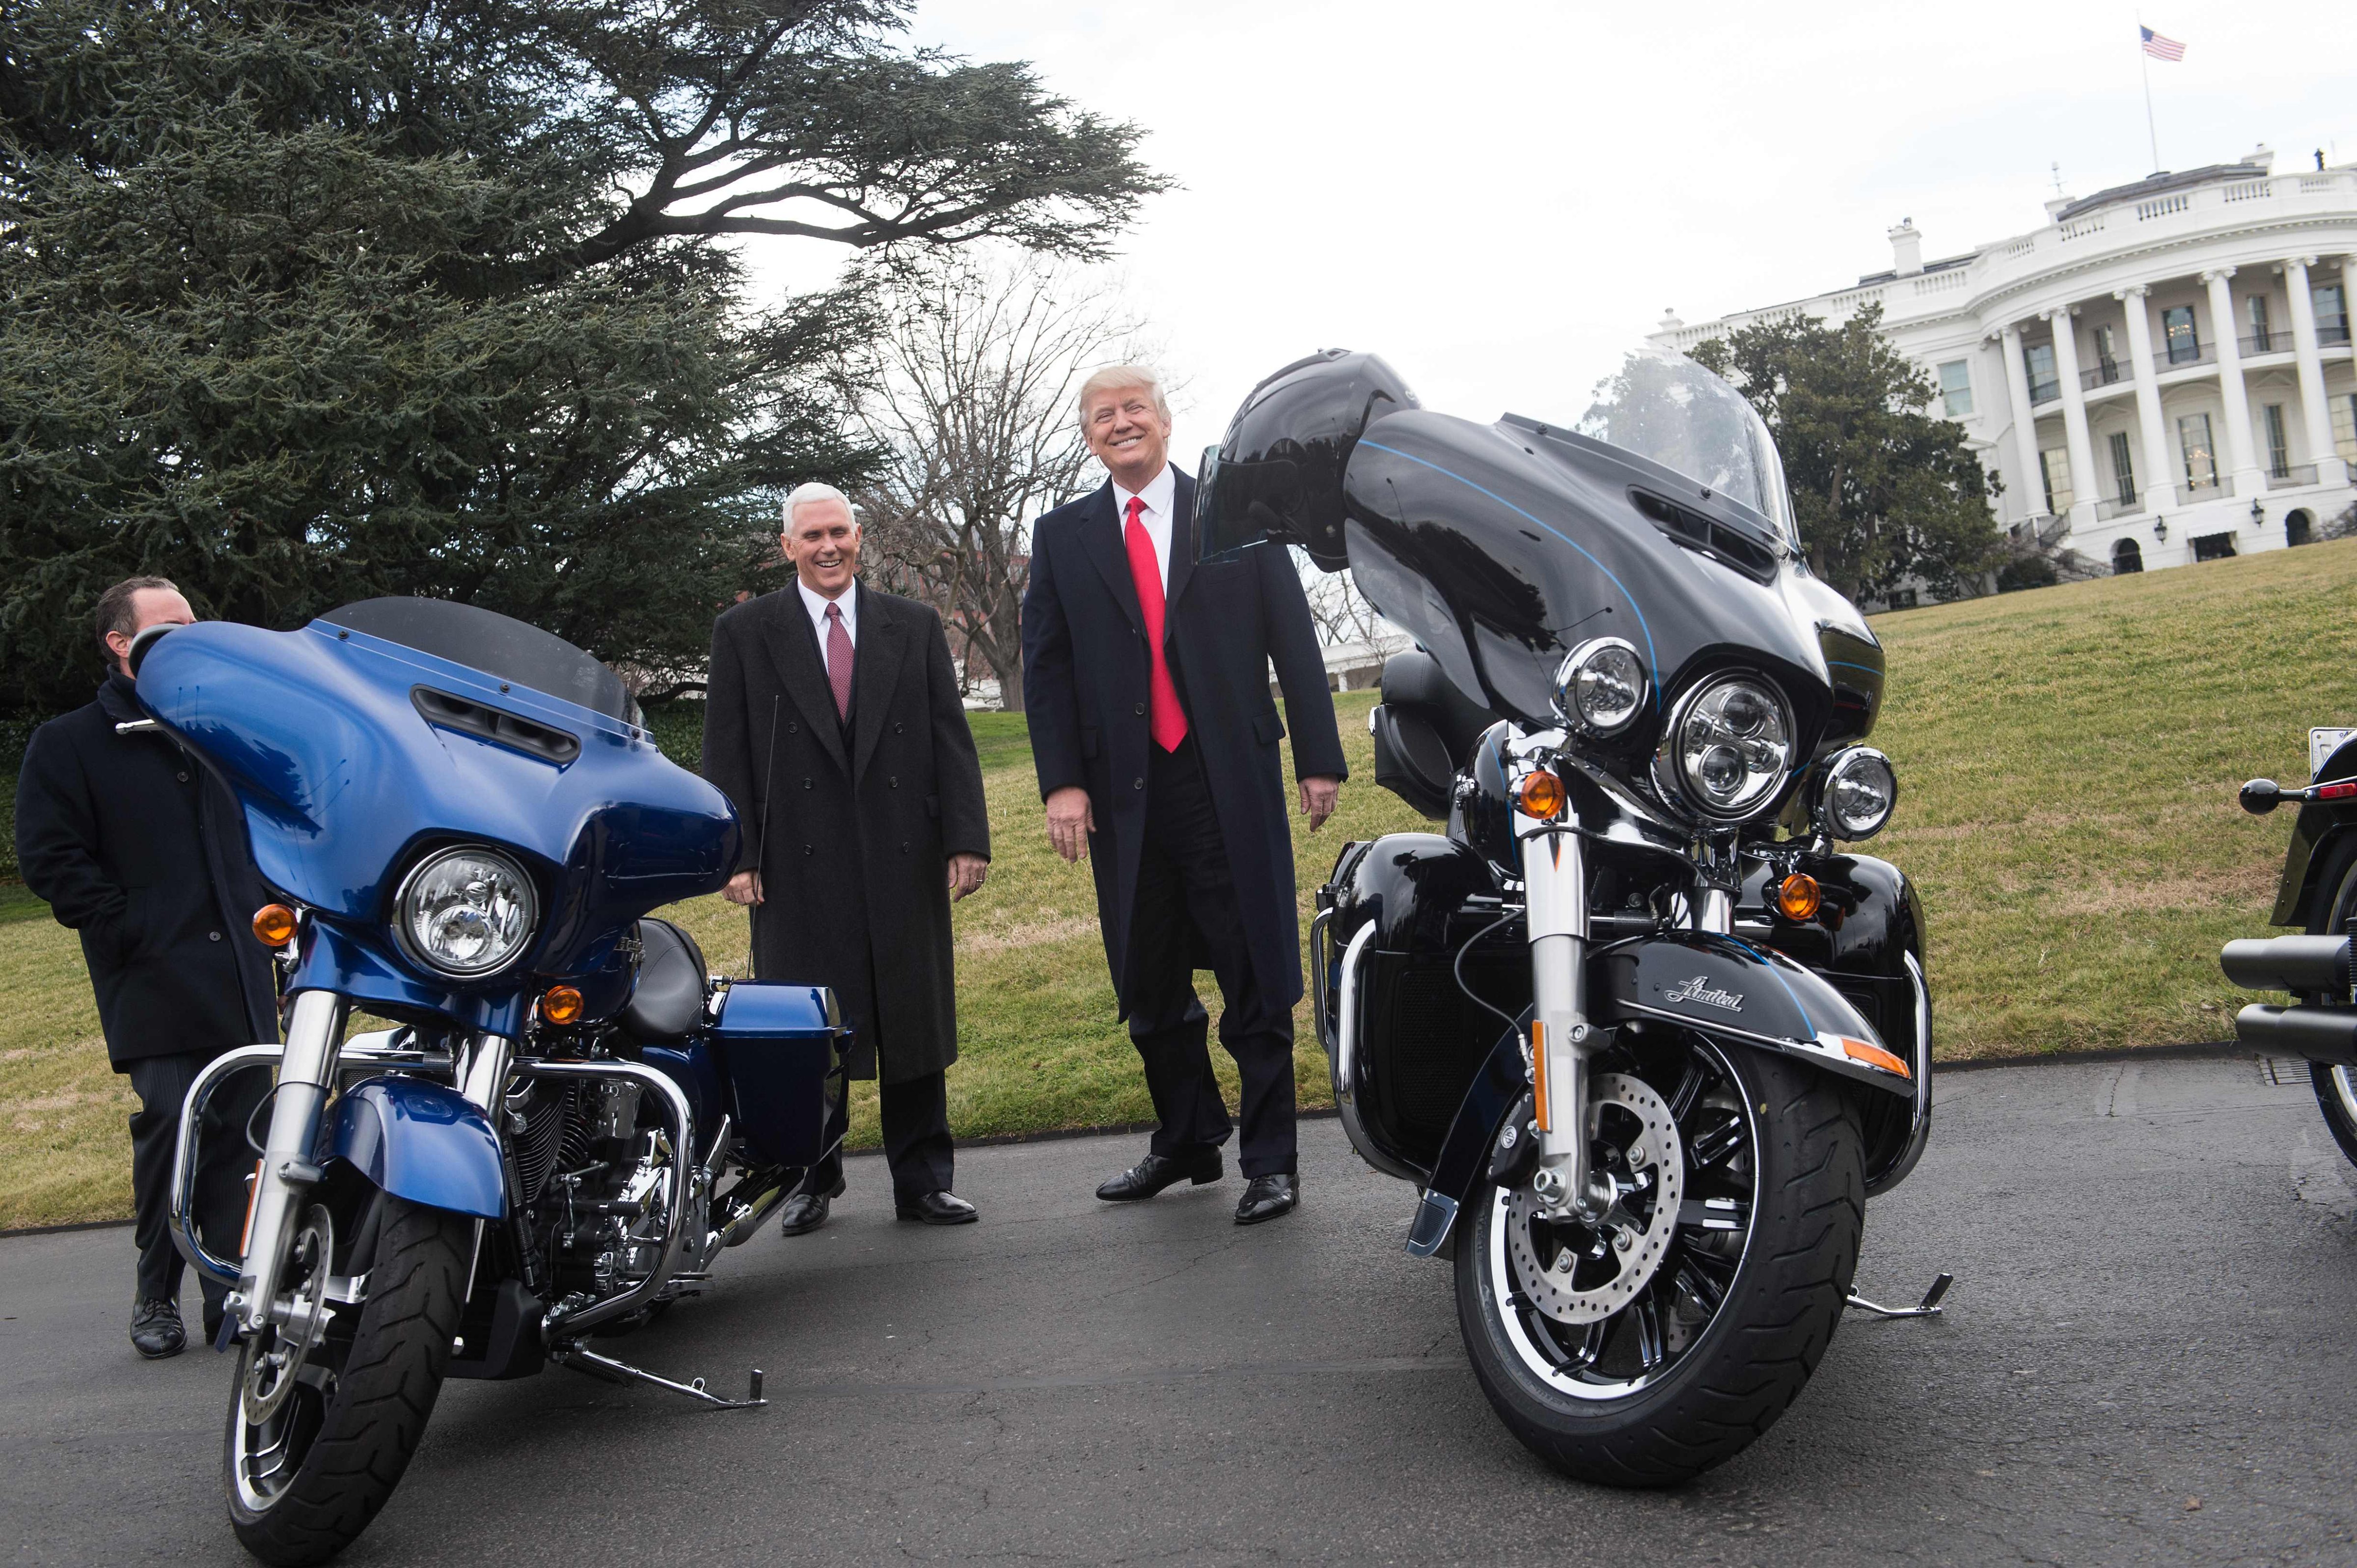 US President Donald Trump jokes with reporters after greeting Harley Davidson executives and union representatives on the South Lawn of the White House in Washington, DC, on February 2, 2017 prior to a luncheon with them. (Nicholas Kamm - AFP/Getty Images)